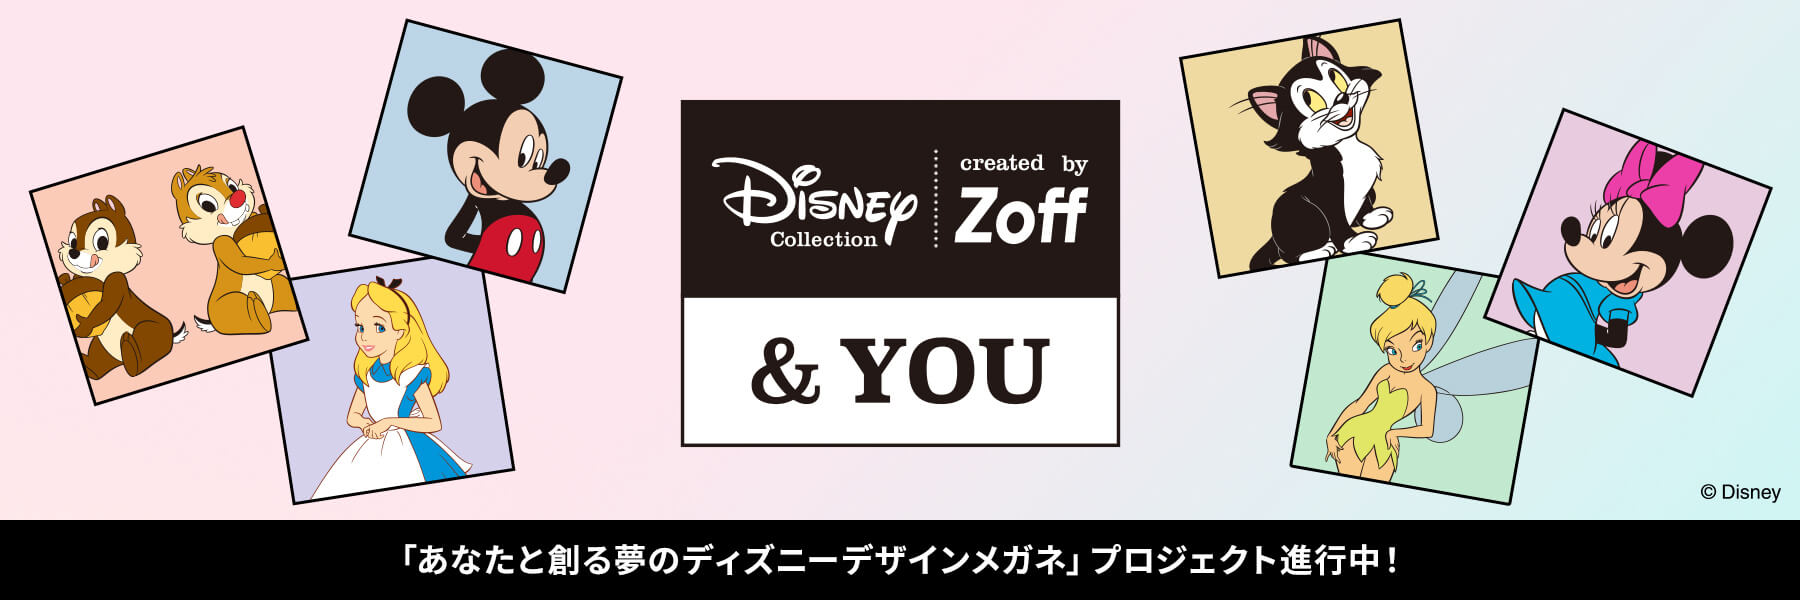 Zoff Disney Collection “& YOU”